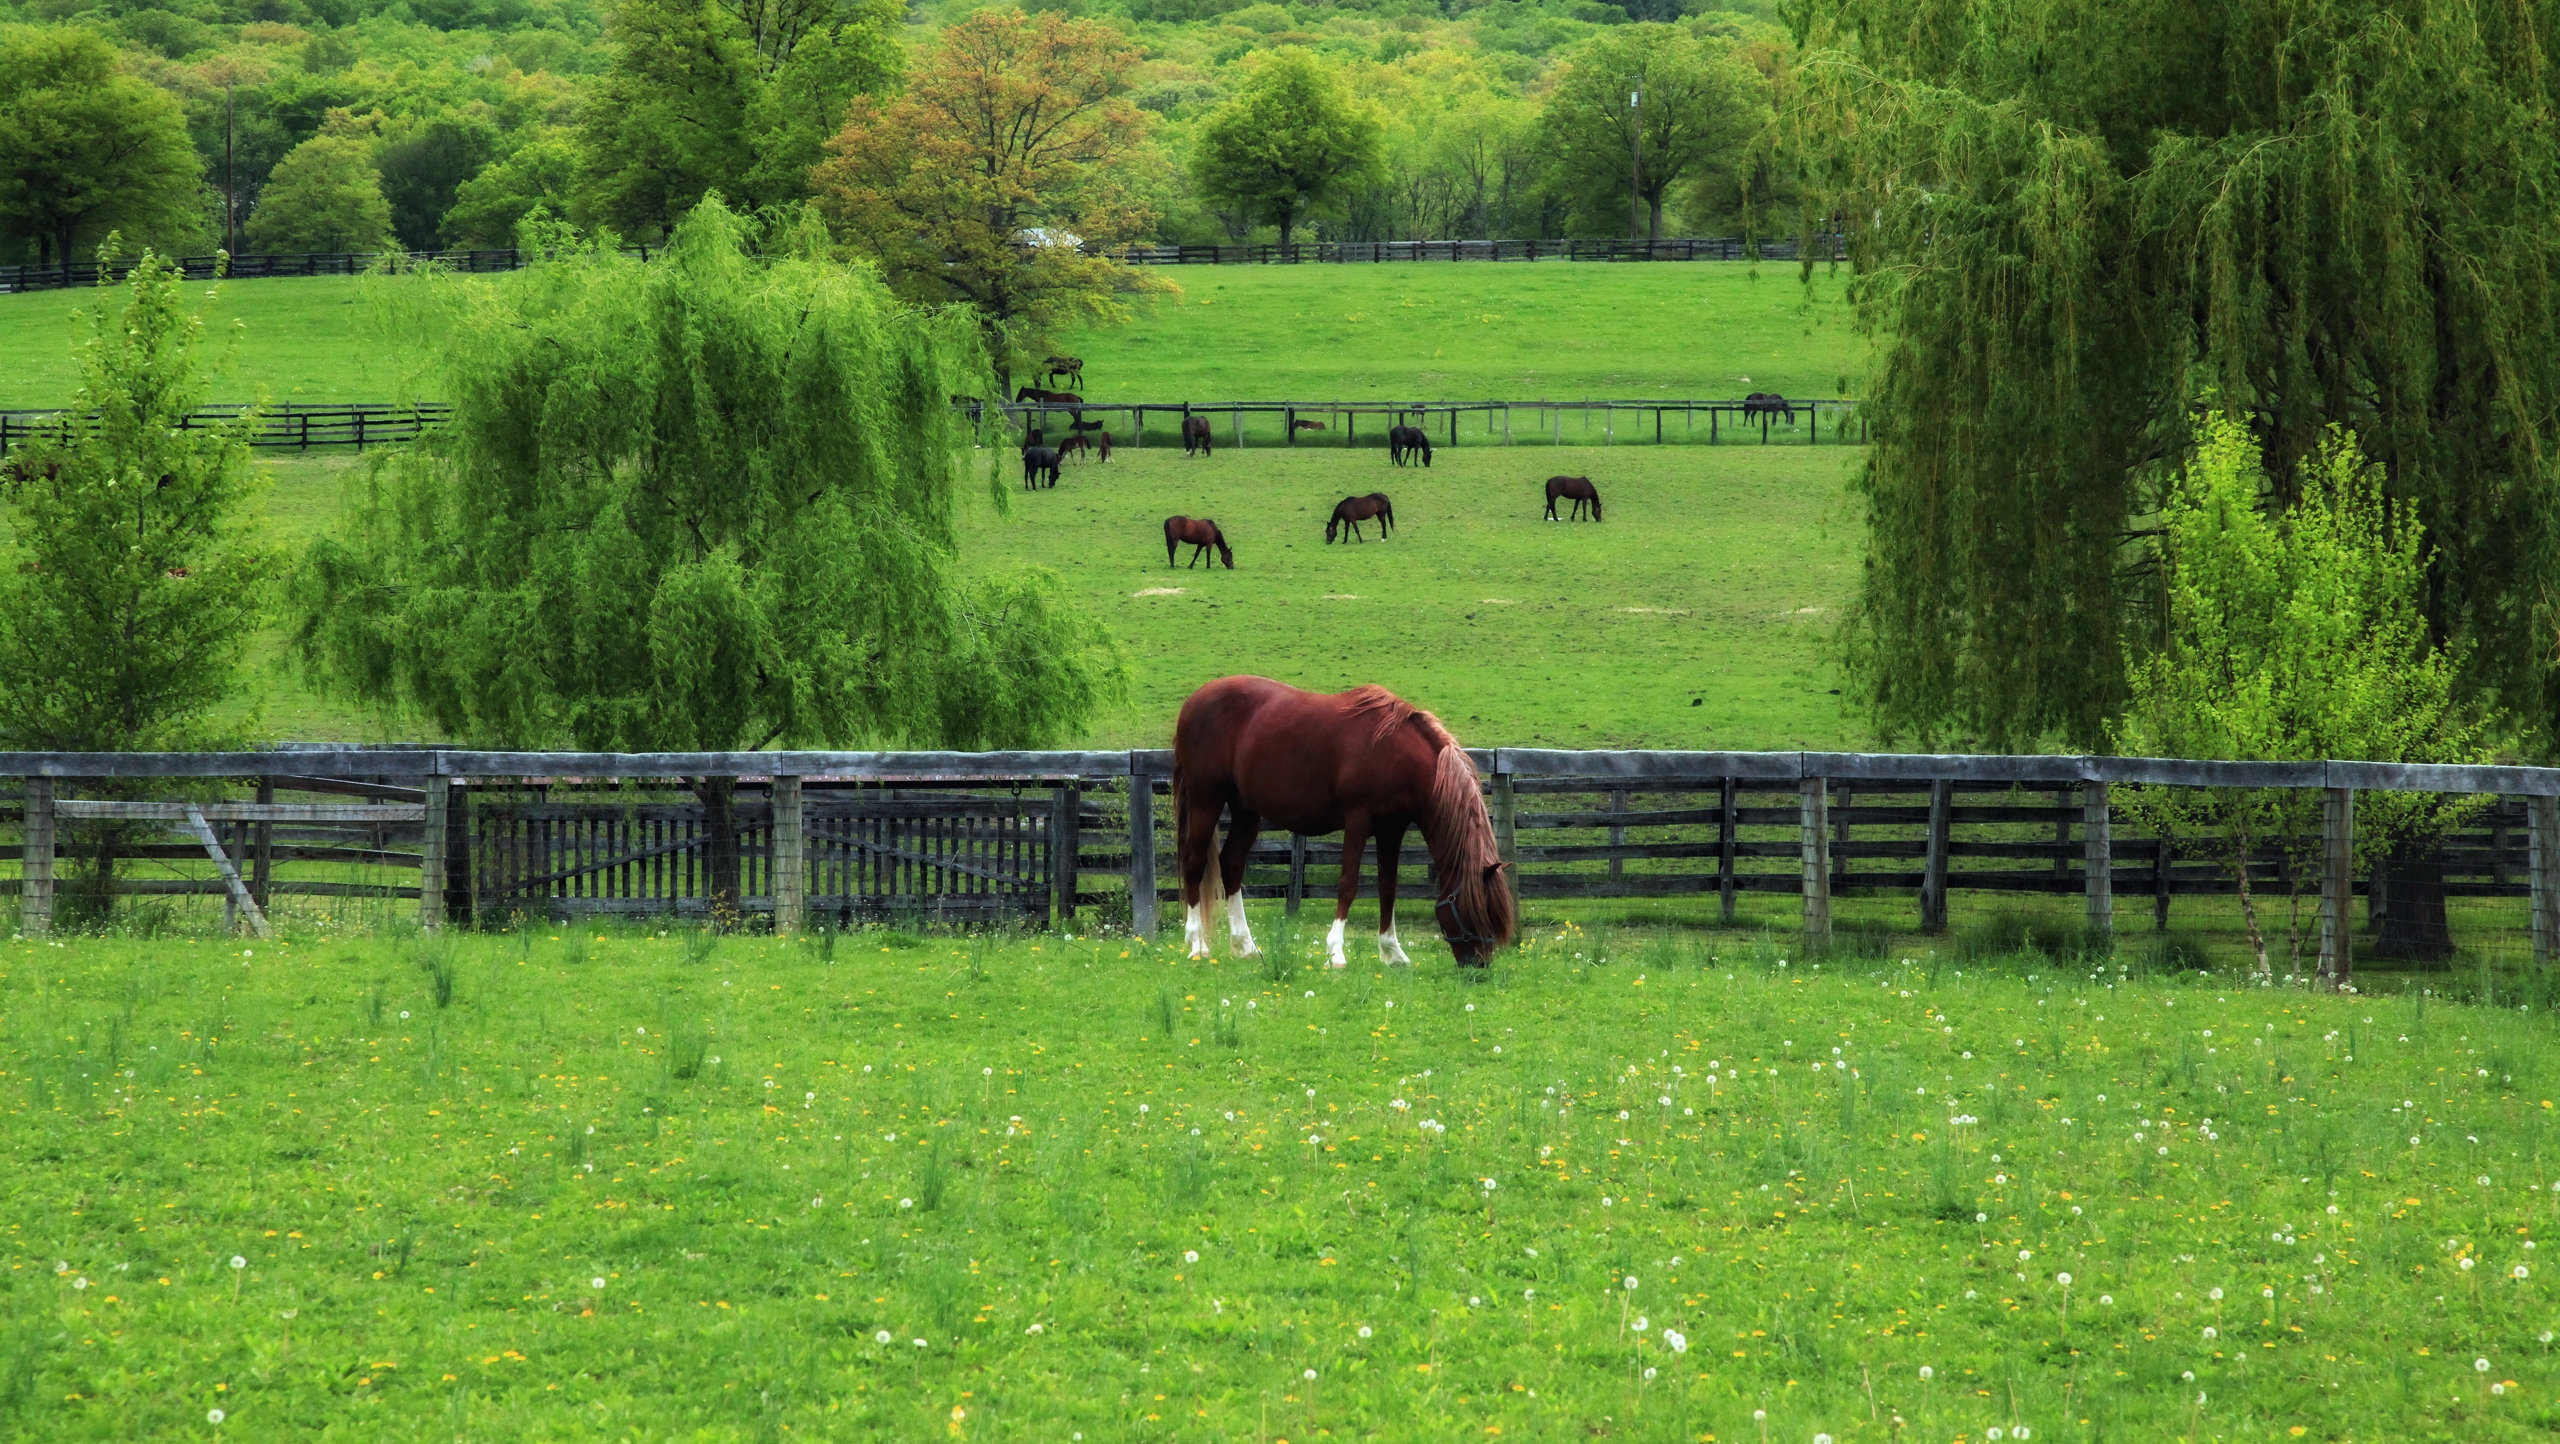 android horse, animals, trees, grass, corral